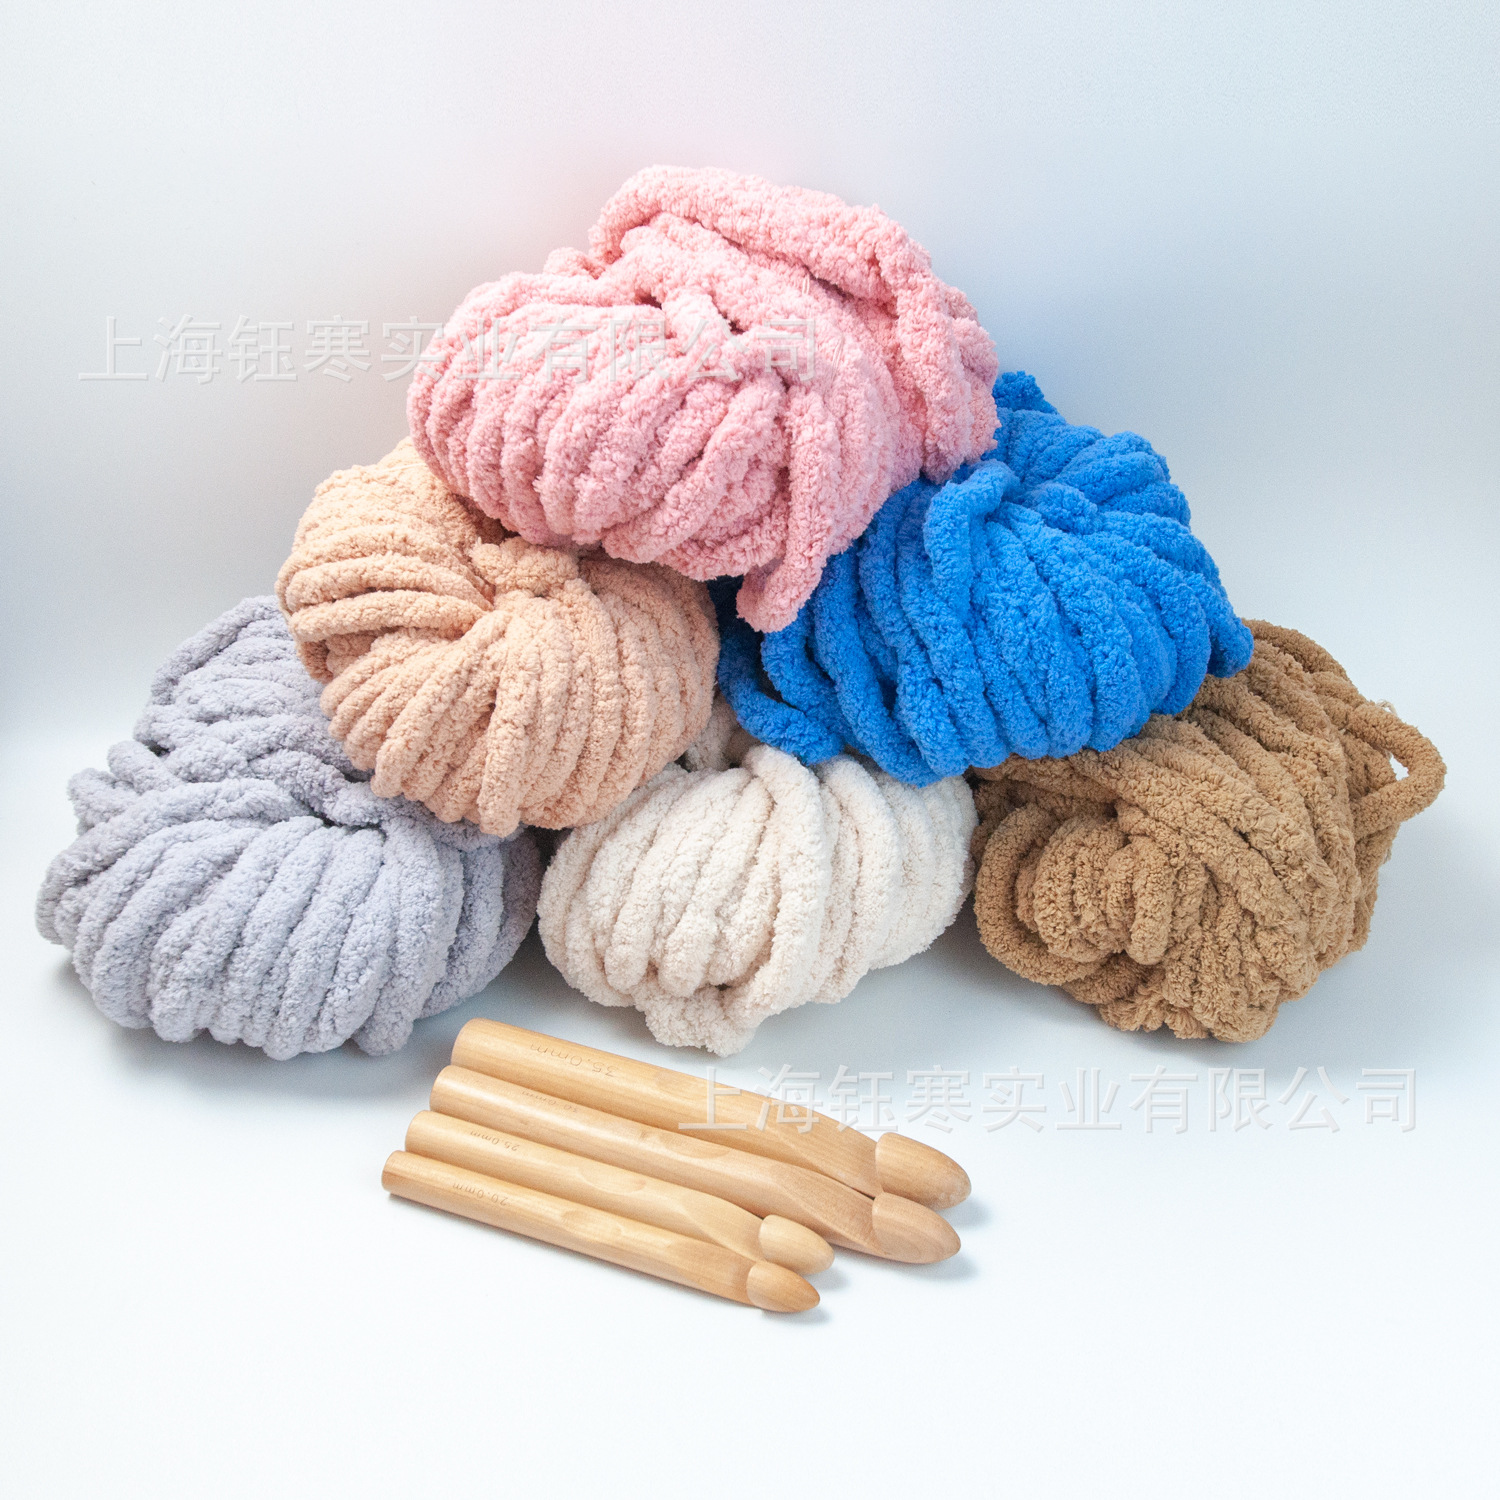 Chunky Blanket Chenille Yarn 48OZ for Arm Knitting, Stripes Multicolored  Pink Gray Polyester Jumbo Super Bulky Easy Weaving Multicolor Yarn 6 Pack